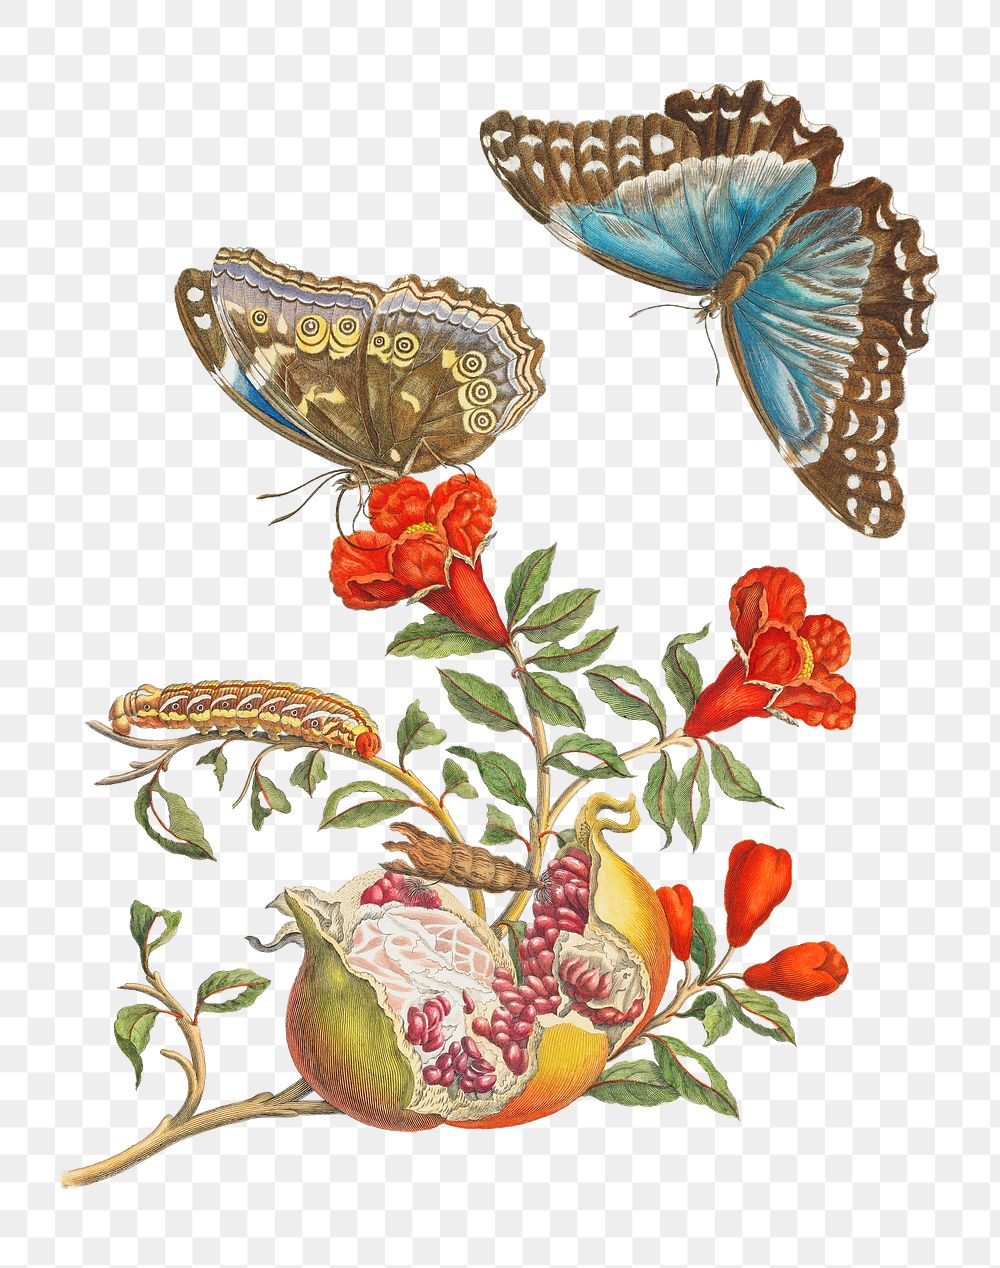 PNG Blue Butterflies and Pomegranate, vintage botanical illustration by Maria Sibylla Merian, transparent background.…